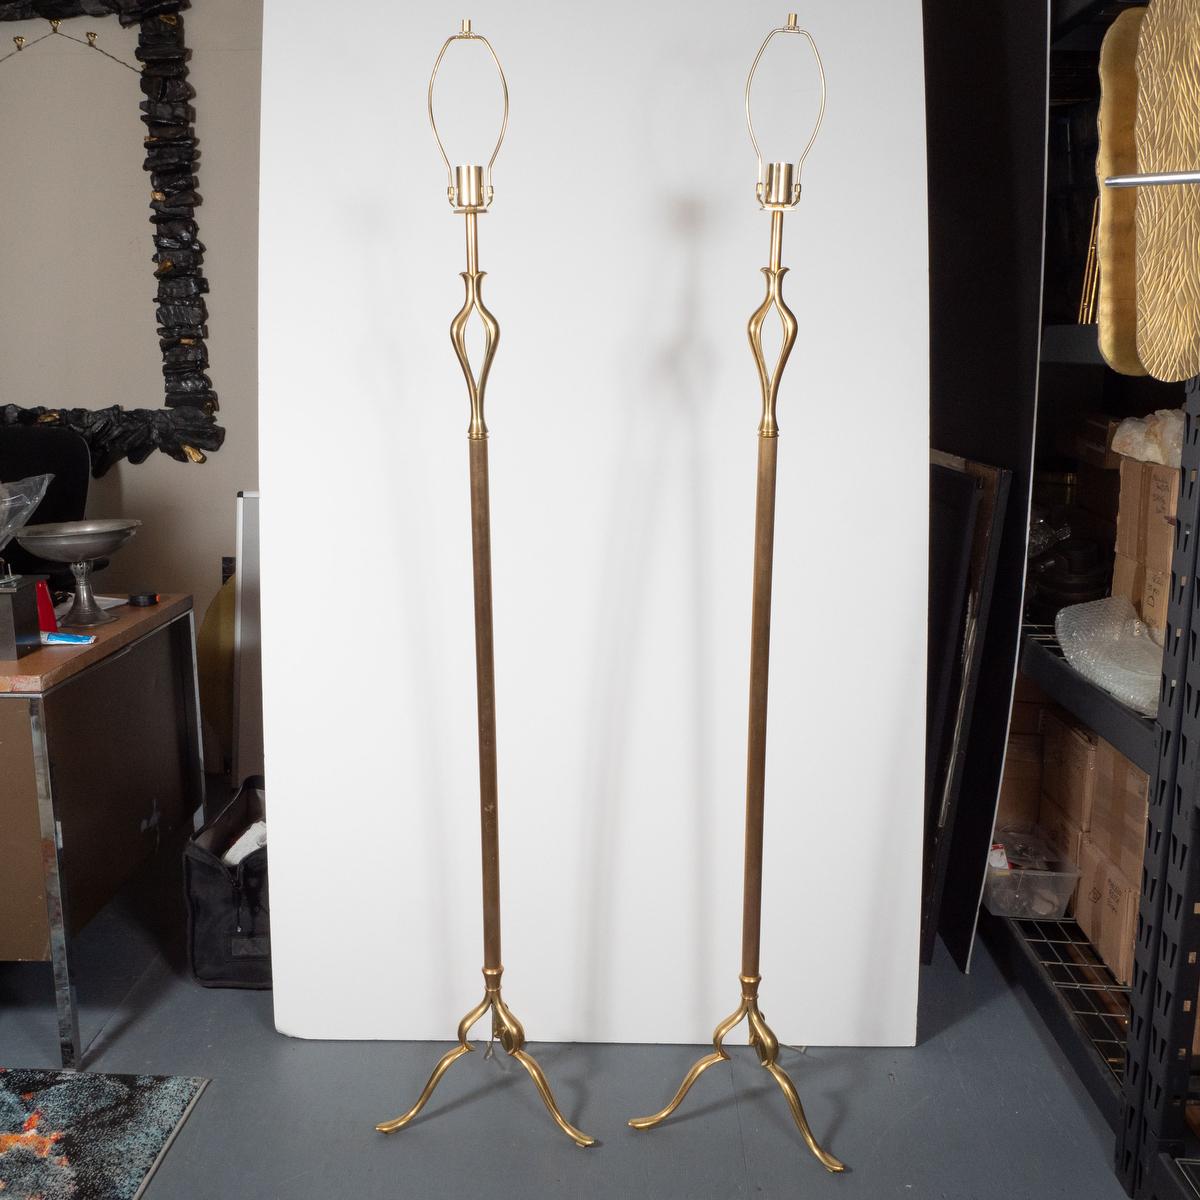 Pair of fluted brass floor lamps with sculptural details and tripod curvilinear bases.